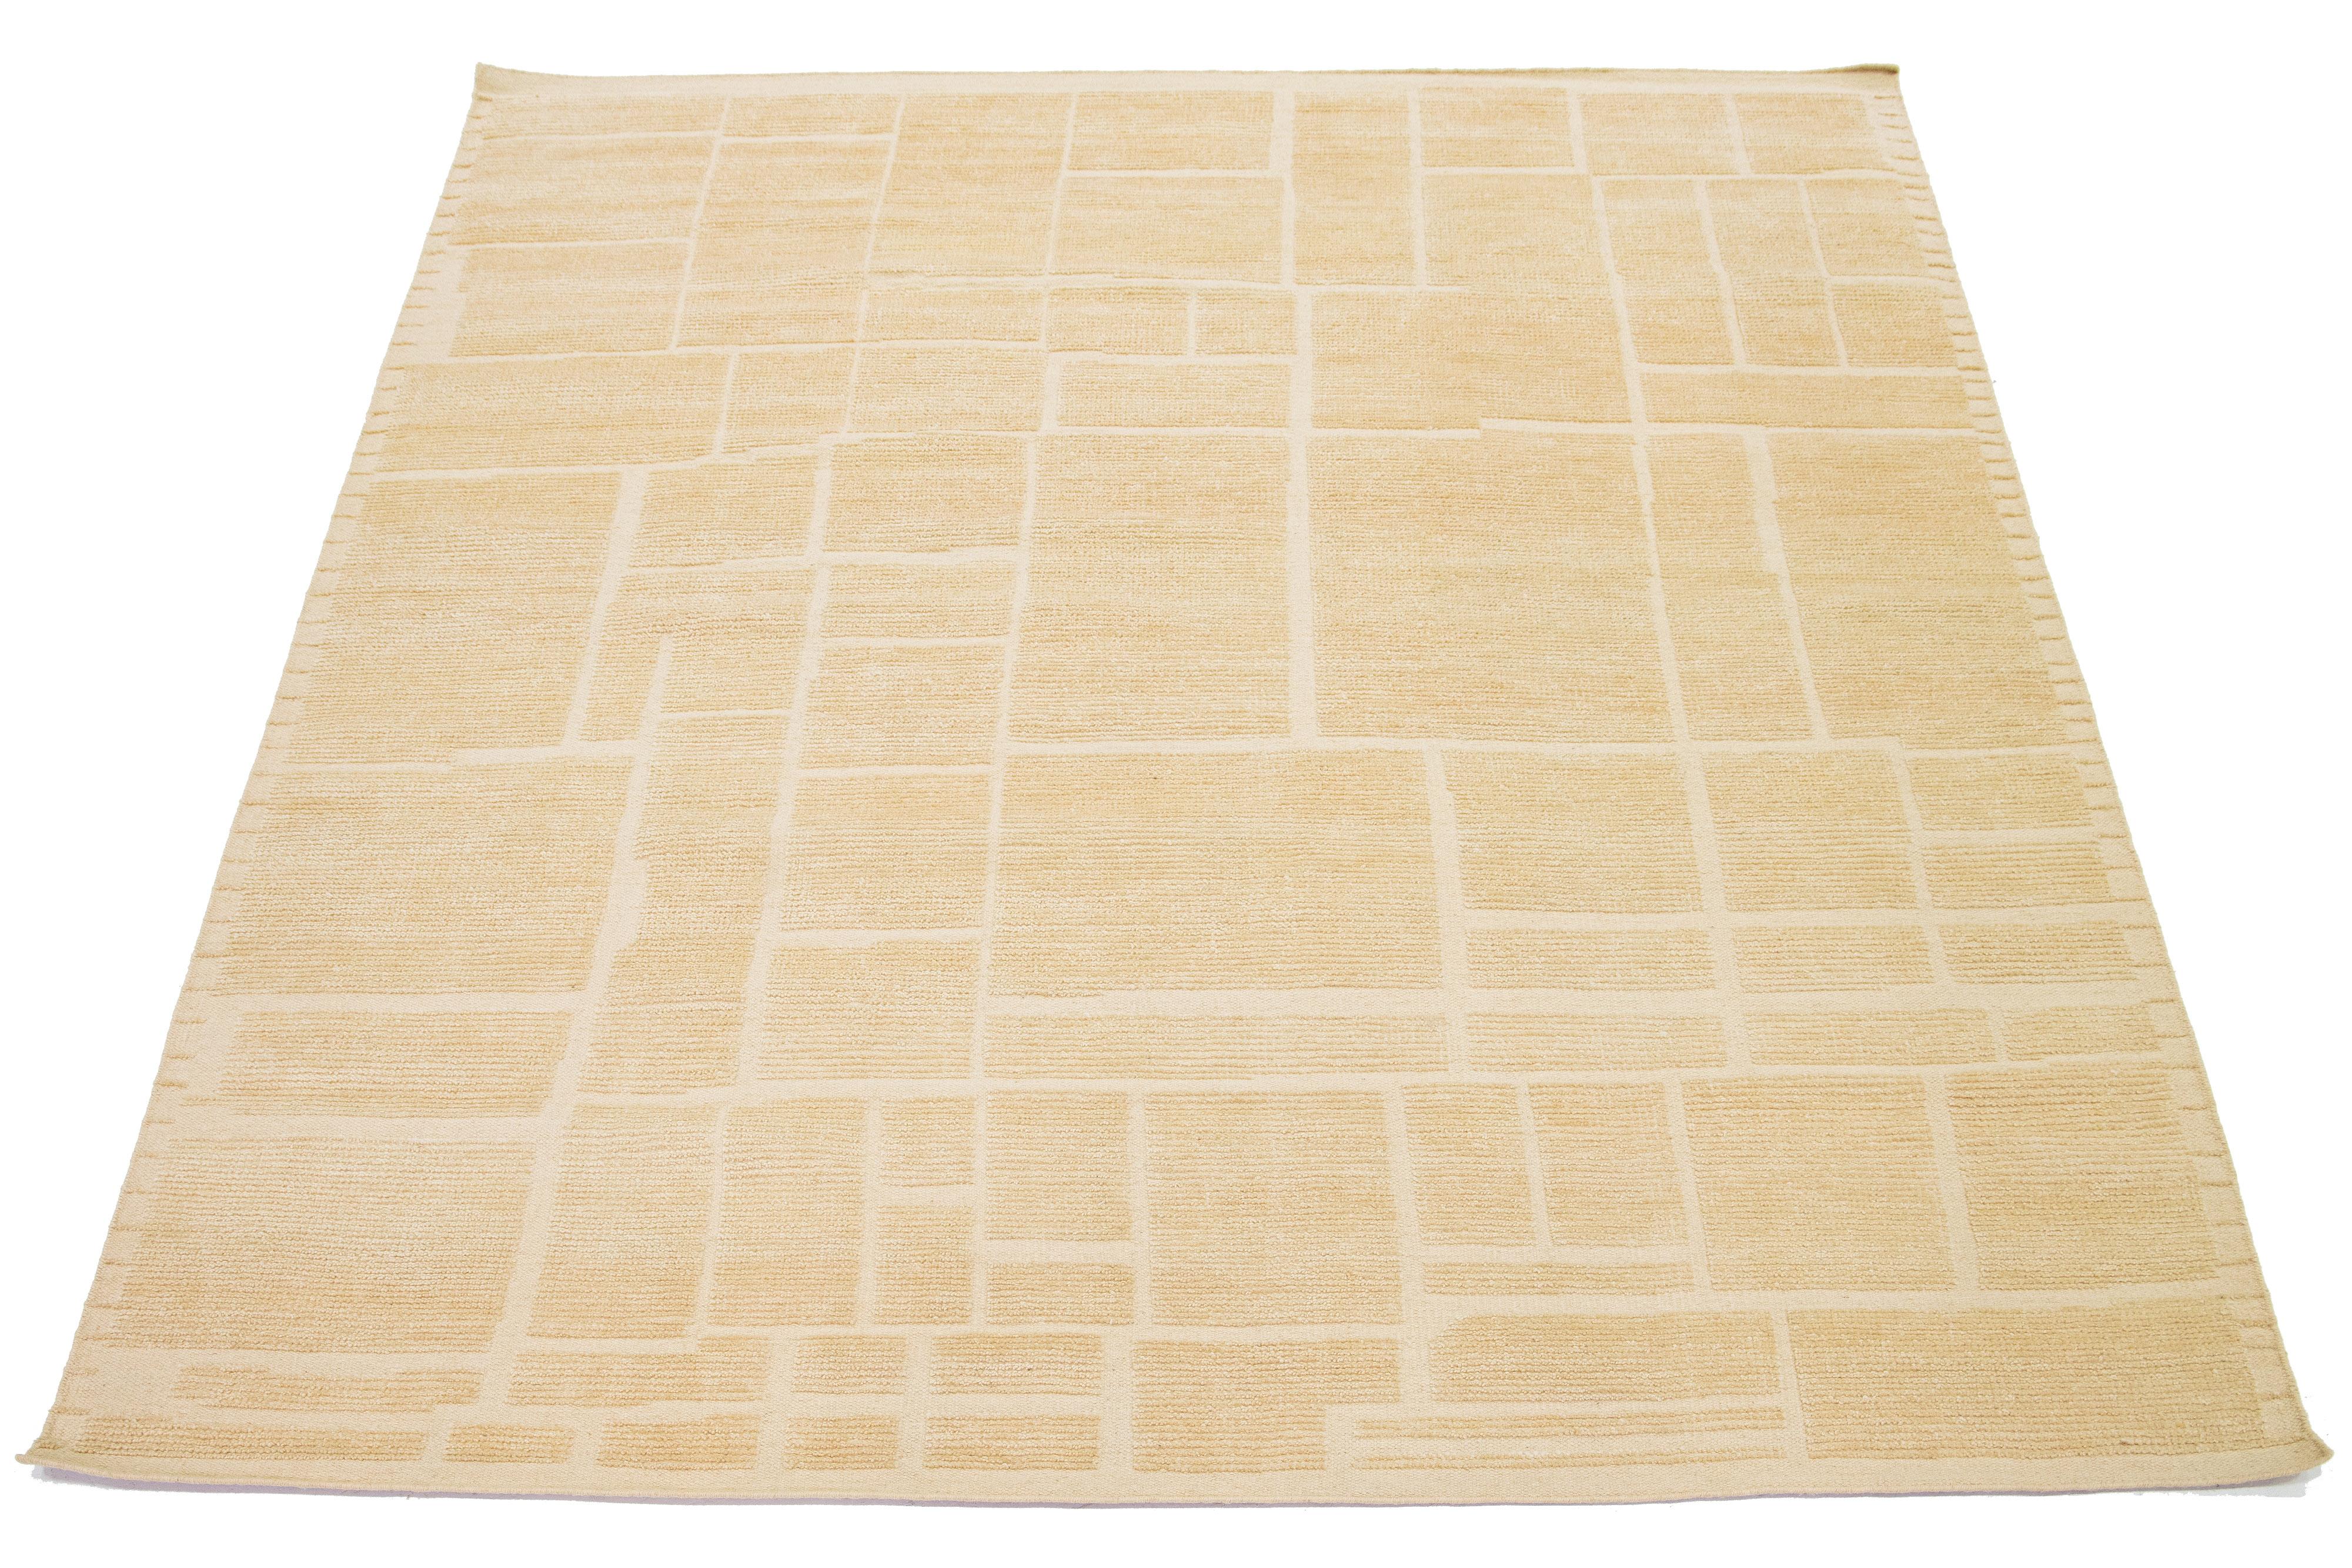 This beautiful, modern Moroccan-style rug is hand-knotted using wool and features a natural beige-tan color for the field. It showcases a stunning geometric design.

This rug measures 8' x 10'.